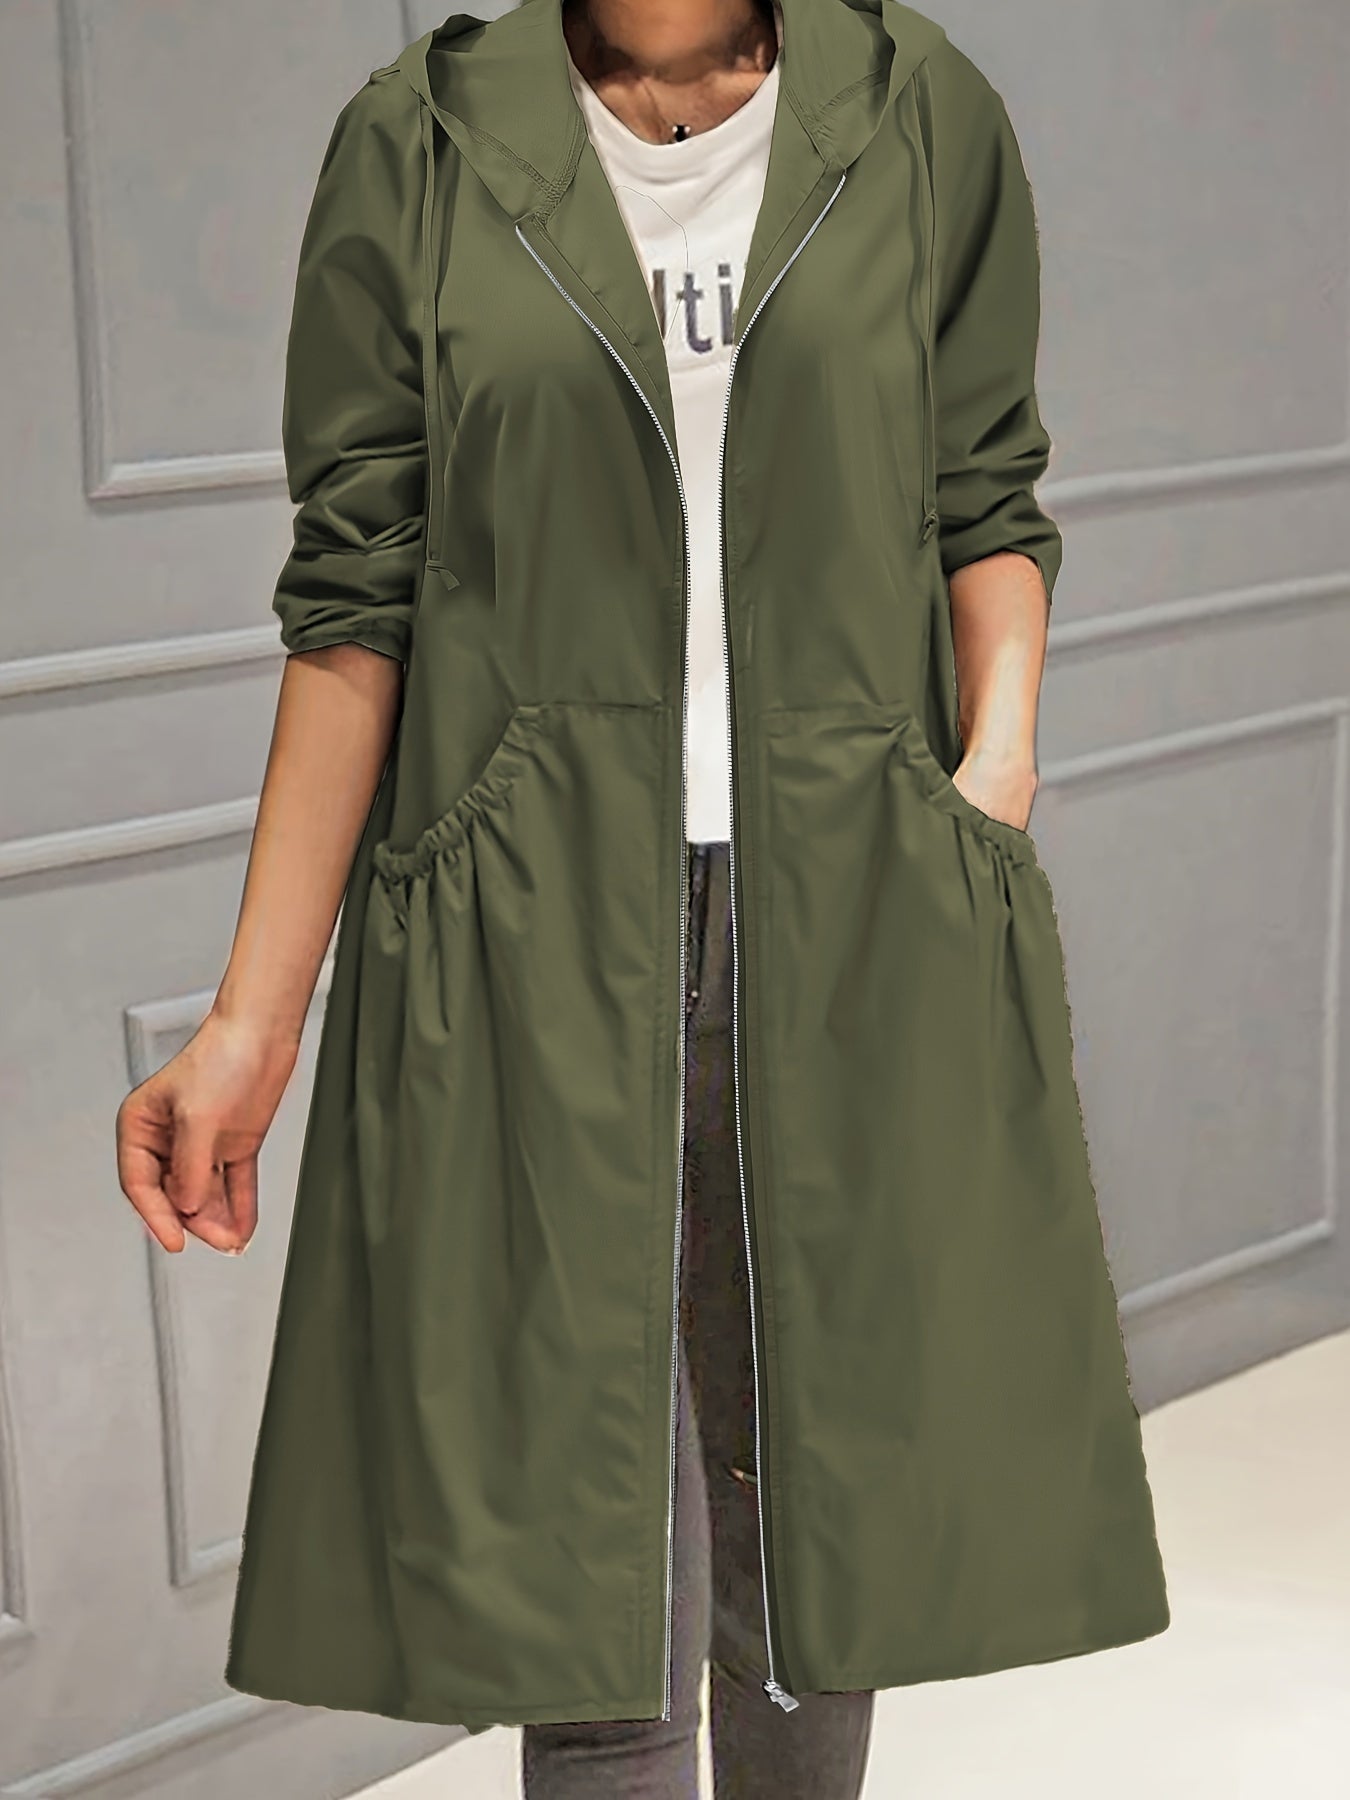 Plus Size Casual Trench Coat, Women's Plus Solid Long Sleeve Hooded Drawstring Zipper Longline Trench Coat With Pockets